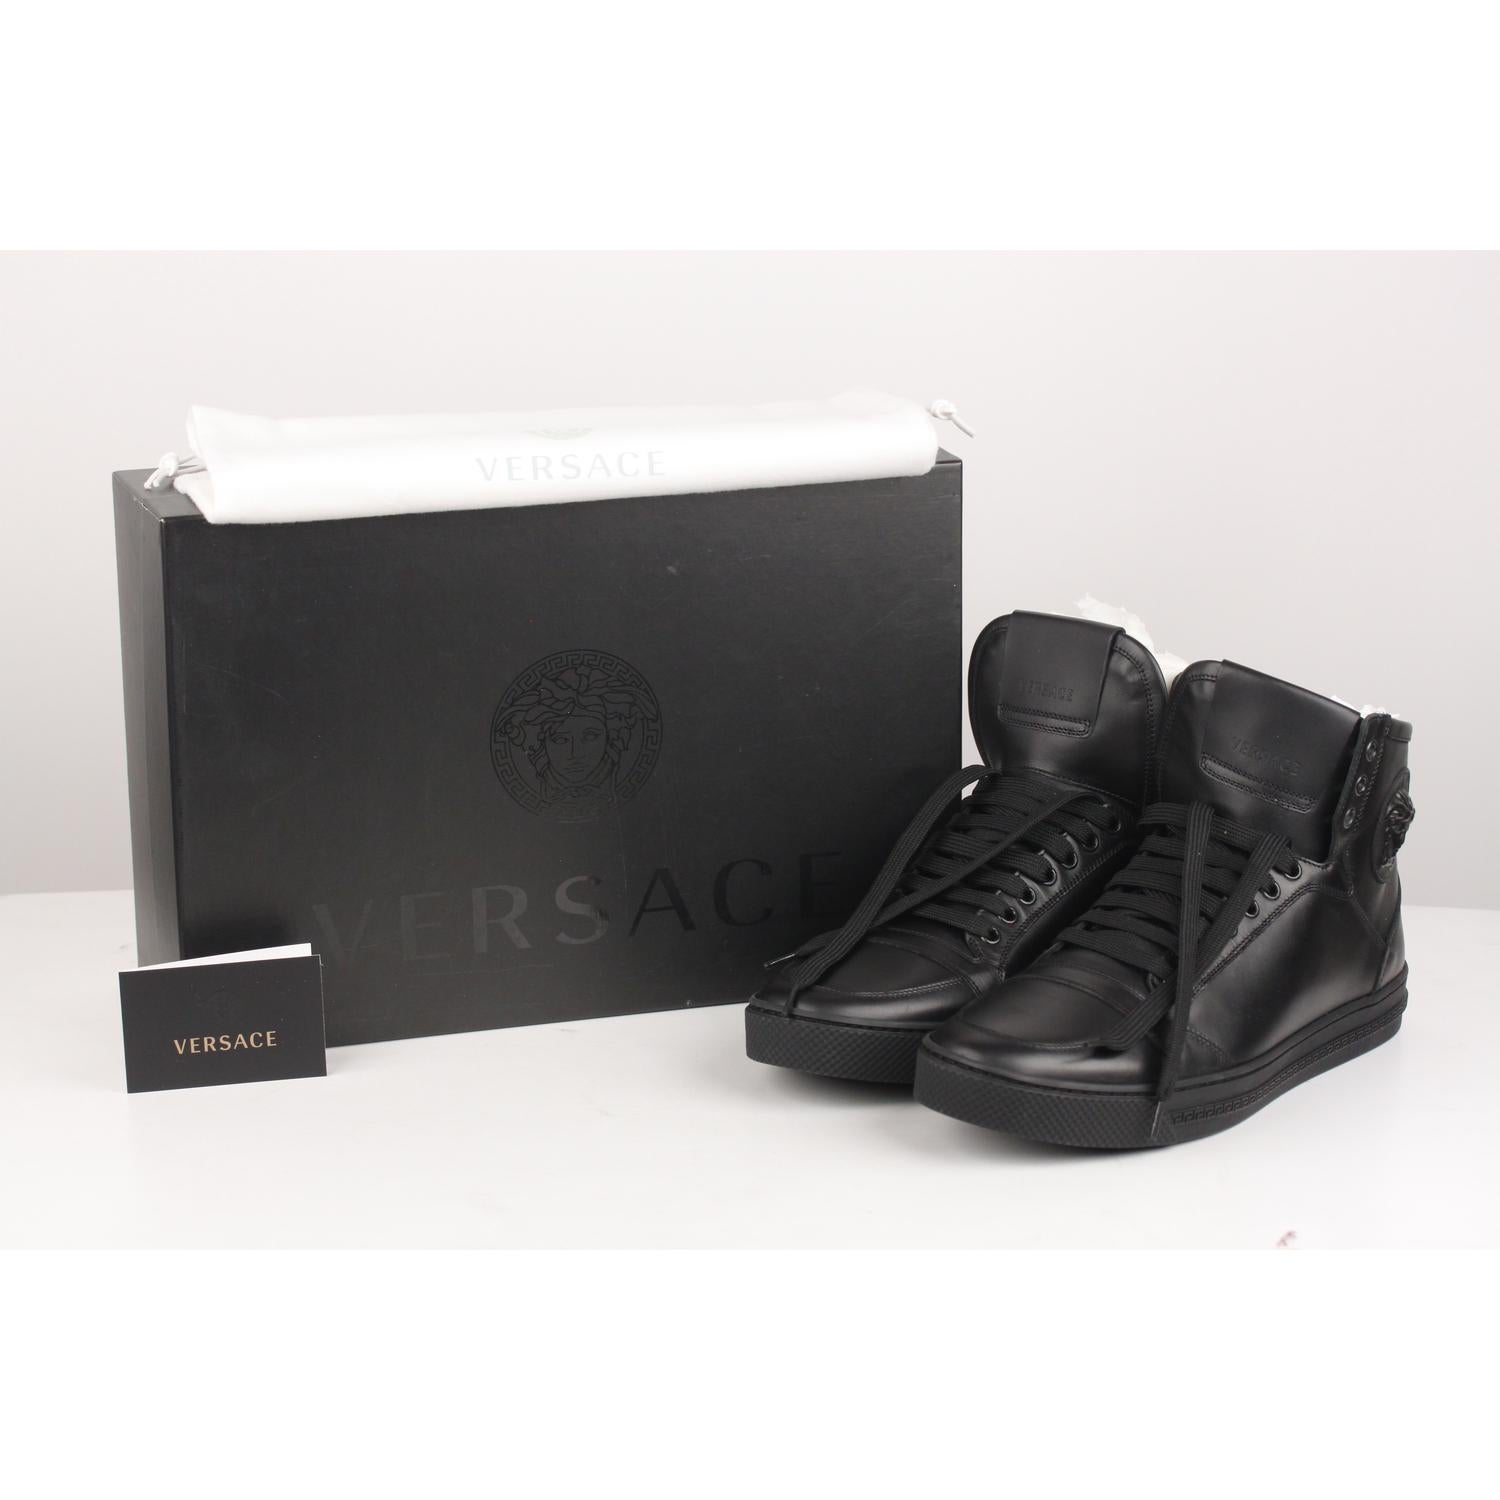 Versace high-back sneakers, made of black leather. Lace-up fastening. VERSACE logo on the tongue. Medusa head on the side. Black rubber sole with Greek pattern. Size 43. Made in Italy